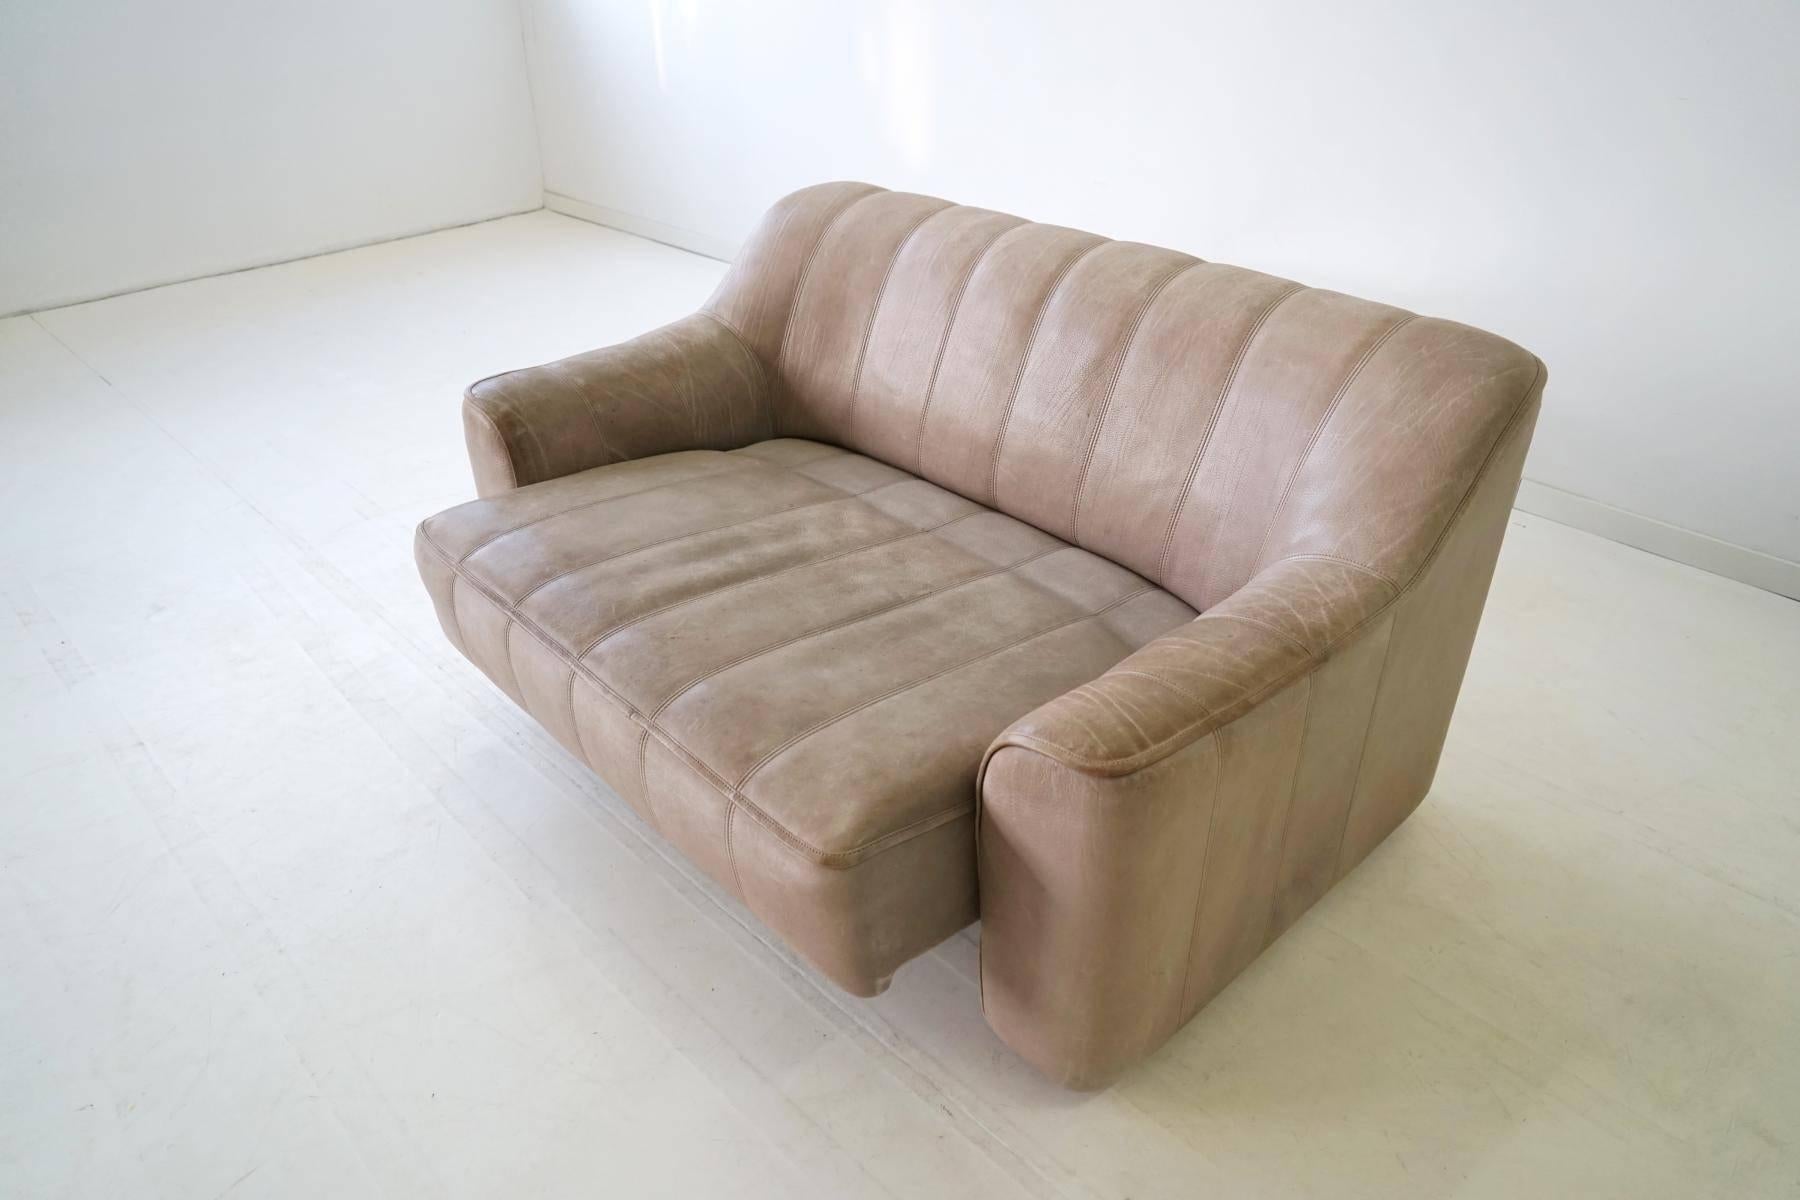 Two-Seat Ds 44 Sofa by De Sede Neck Leather Extendable Seat 2